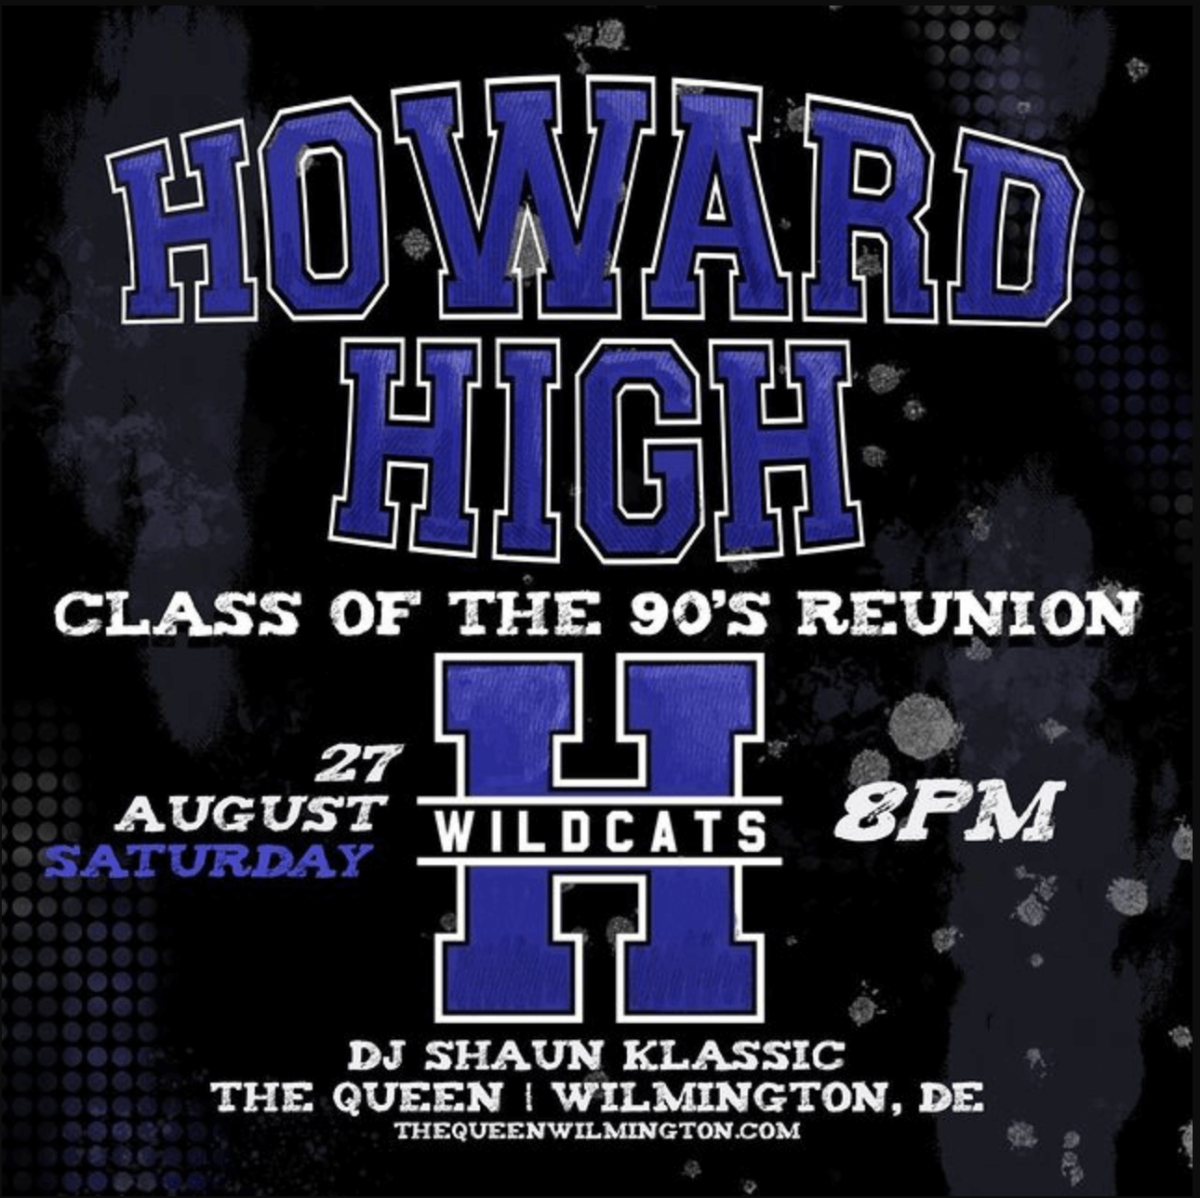 Howard High Class of the 90s Reunion